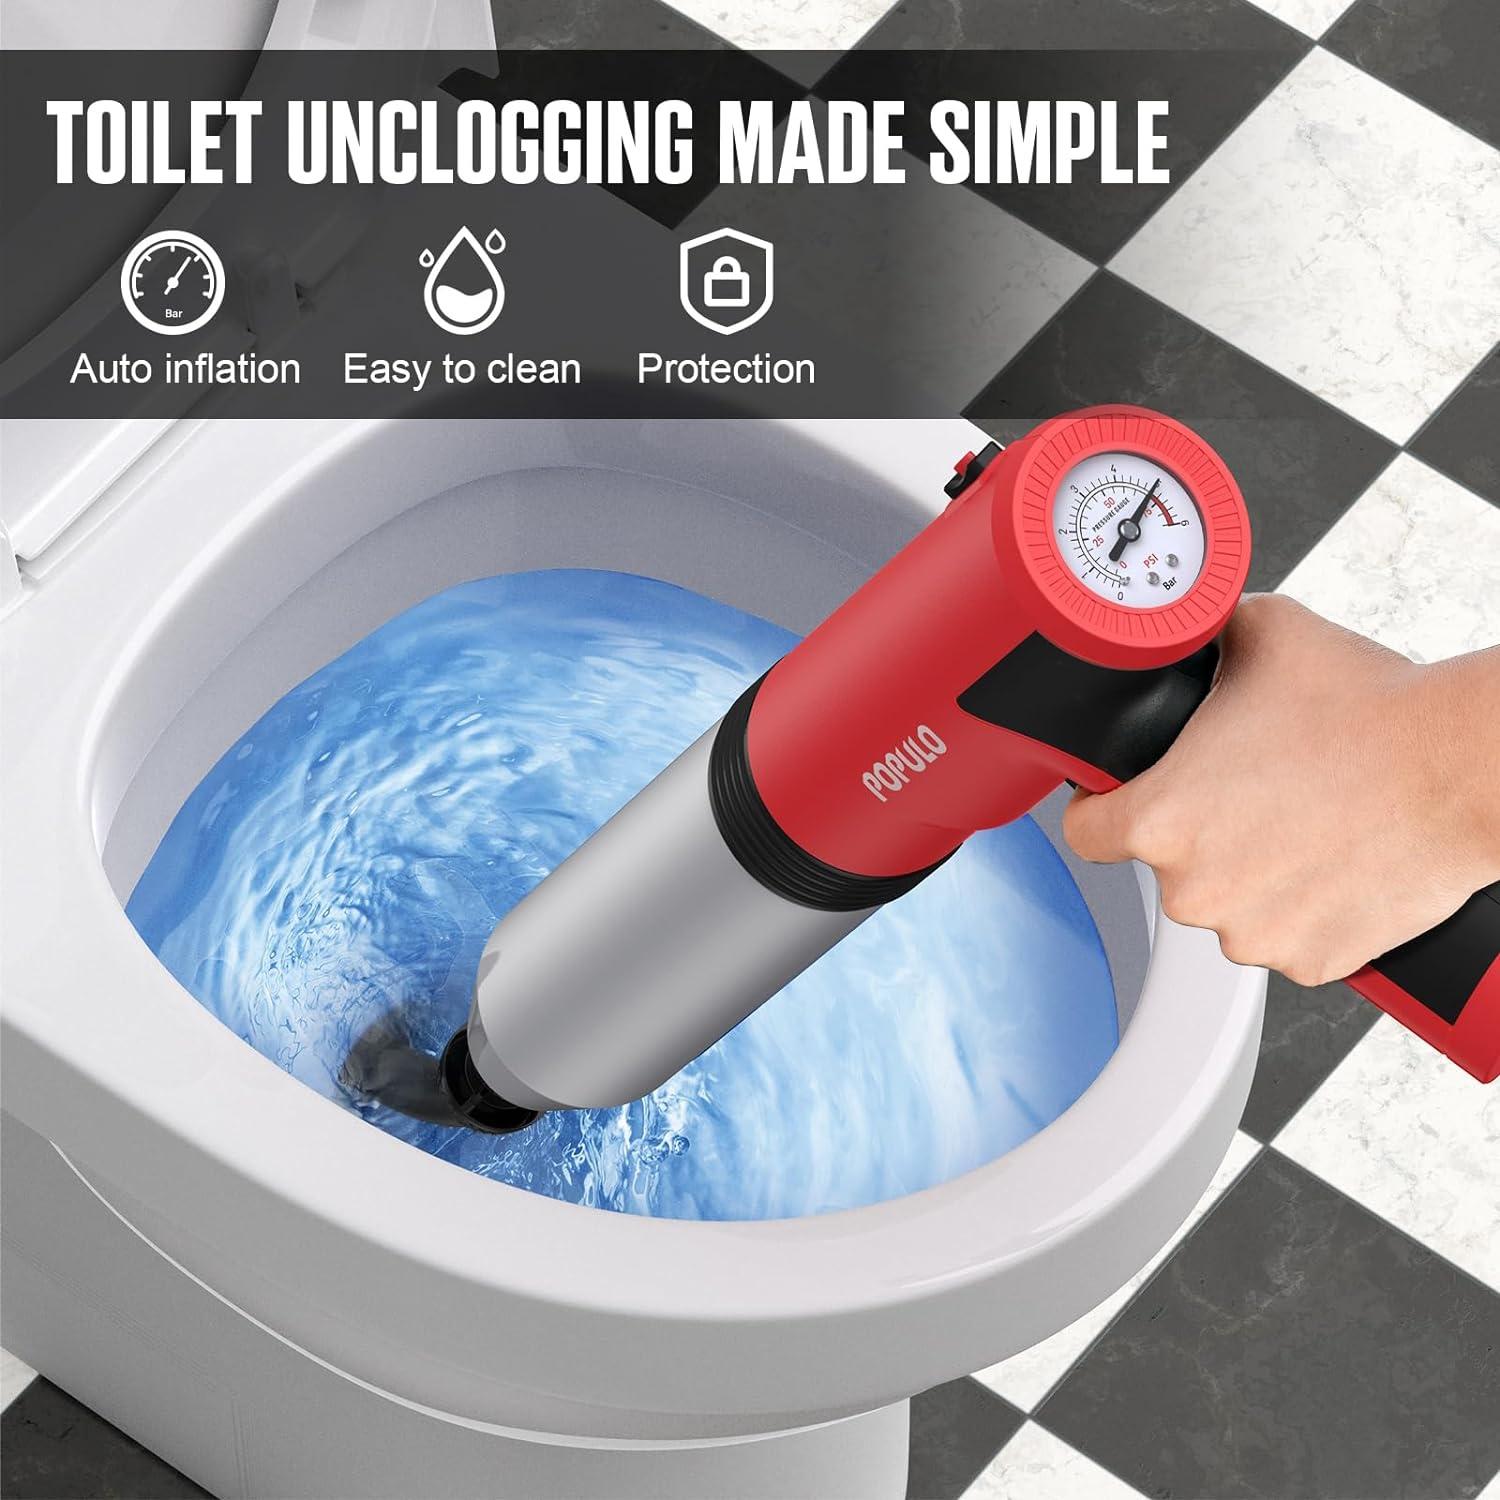 POPULO Electric Plunger Toilet - Instant High Pressure Drain Unclogging | Powerful Bathroom, Floor, Sewer, and Pipe Cleaner | Versatile Home Toilet Clog Remover